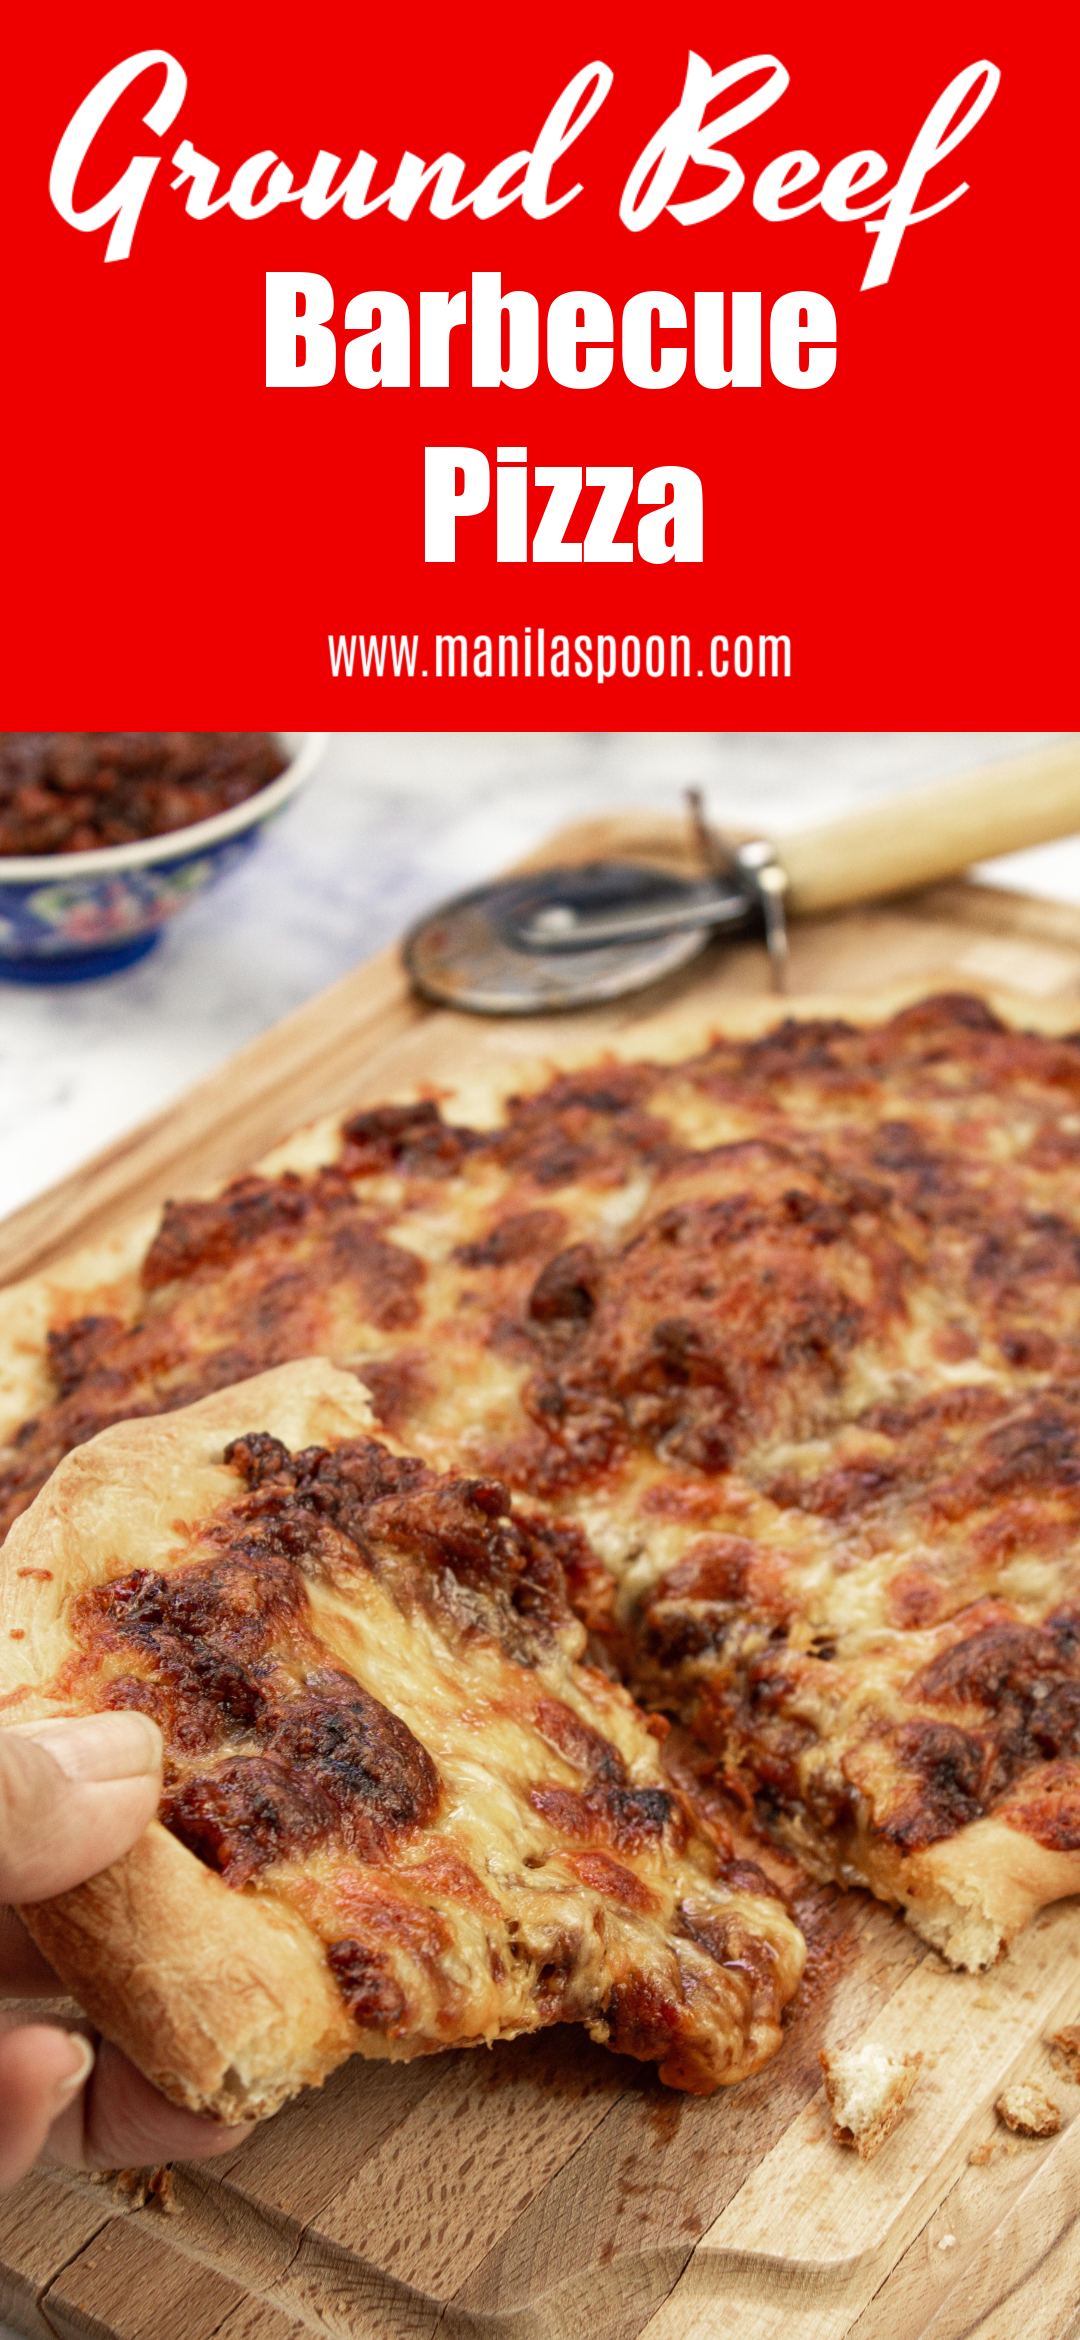 Ground Beef Barbecue Pizza